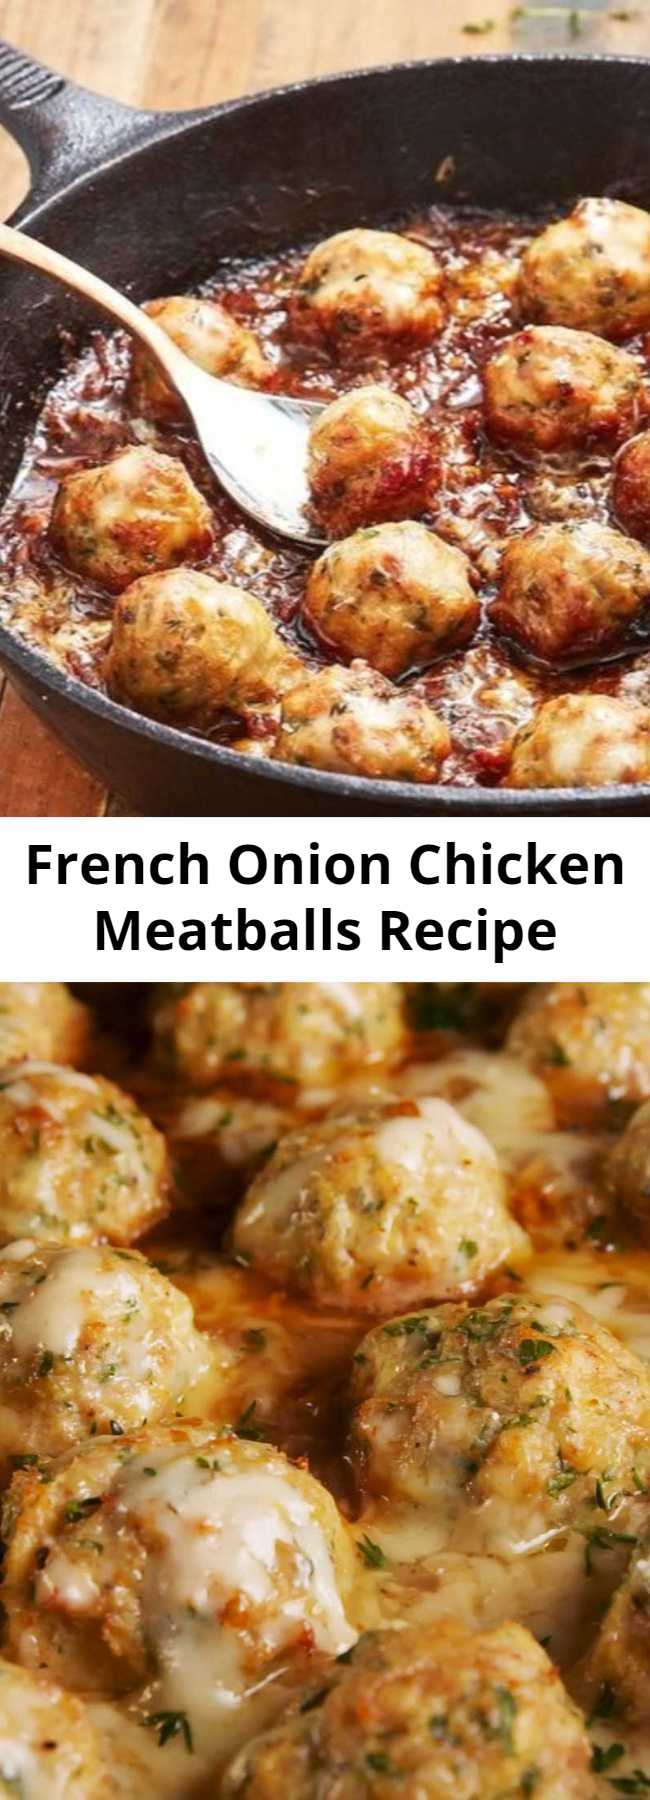 French Onion Chicken Meatballs Recipe - We think everything can be improved by adding meatballs to it. Even French onion soup. It turns an appetizer soup into a full meal, and don't worry, we added even more cheese to it. Gruyère goes into the meatballs and then the whole thing gets topped with more of it before serving. And of course, there's plenty of caramelized onions. #easy #recipe #chickenrecipes #dinnerrecipes #lowcarb #keto #frenchonion #chickenmeatballs #meatballs